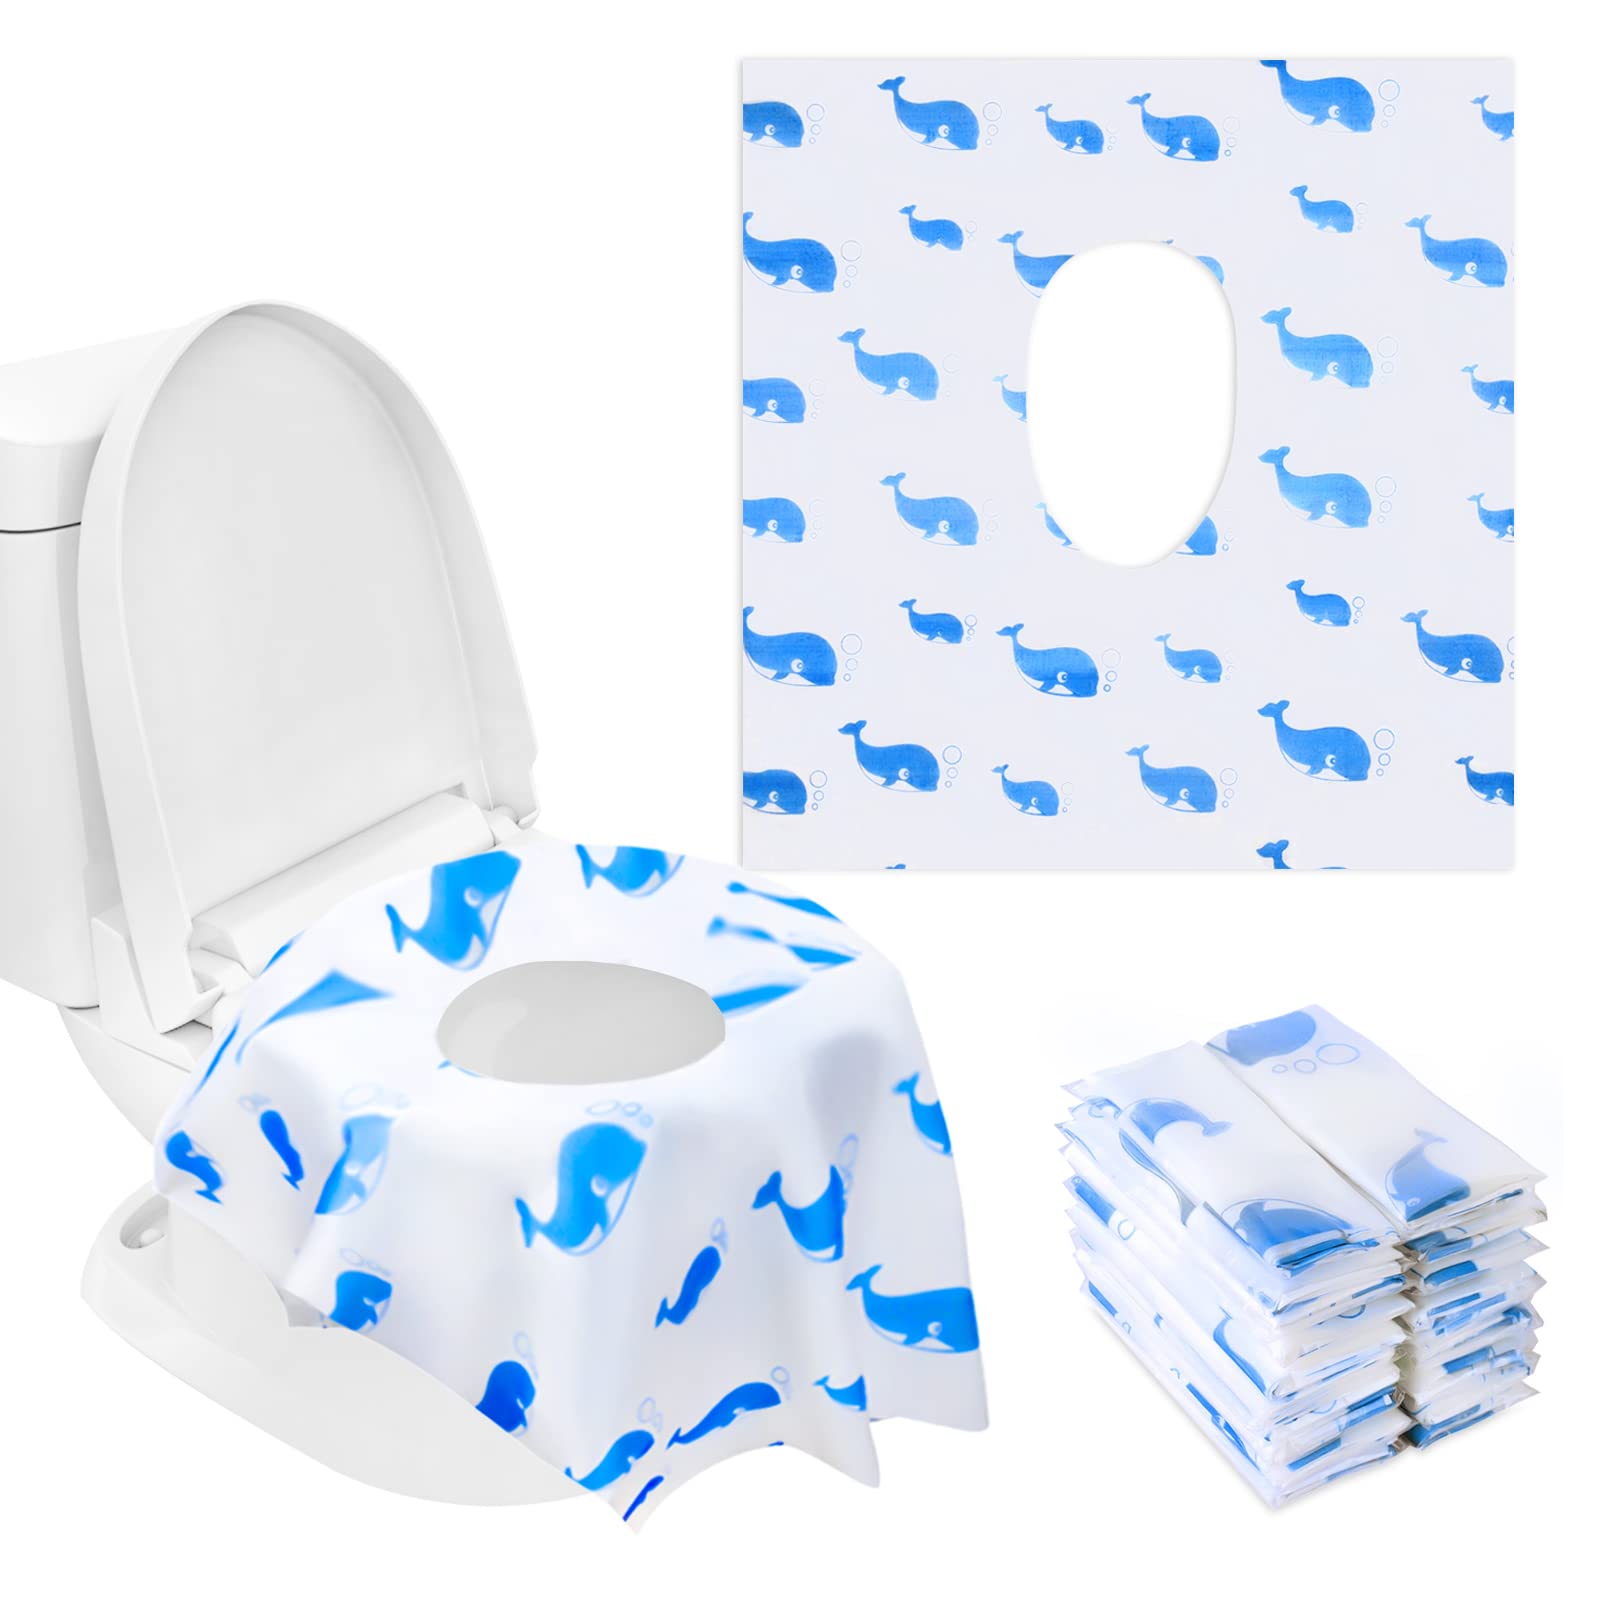  20 Extra Large Toilet Seat Covers Disposable for Kids